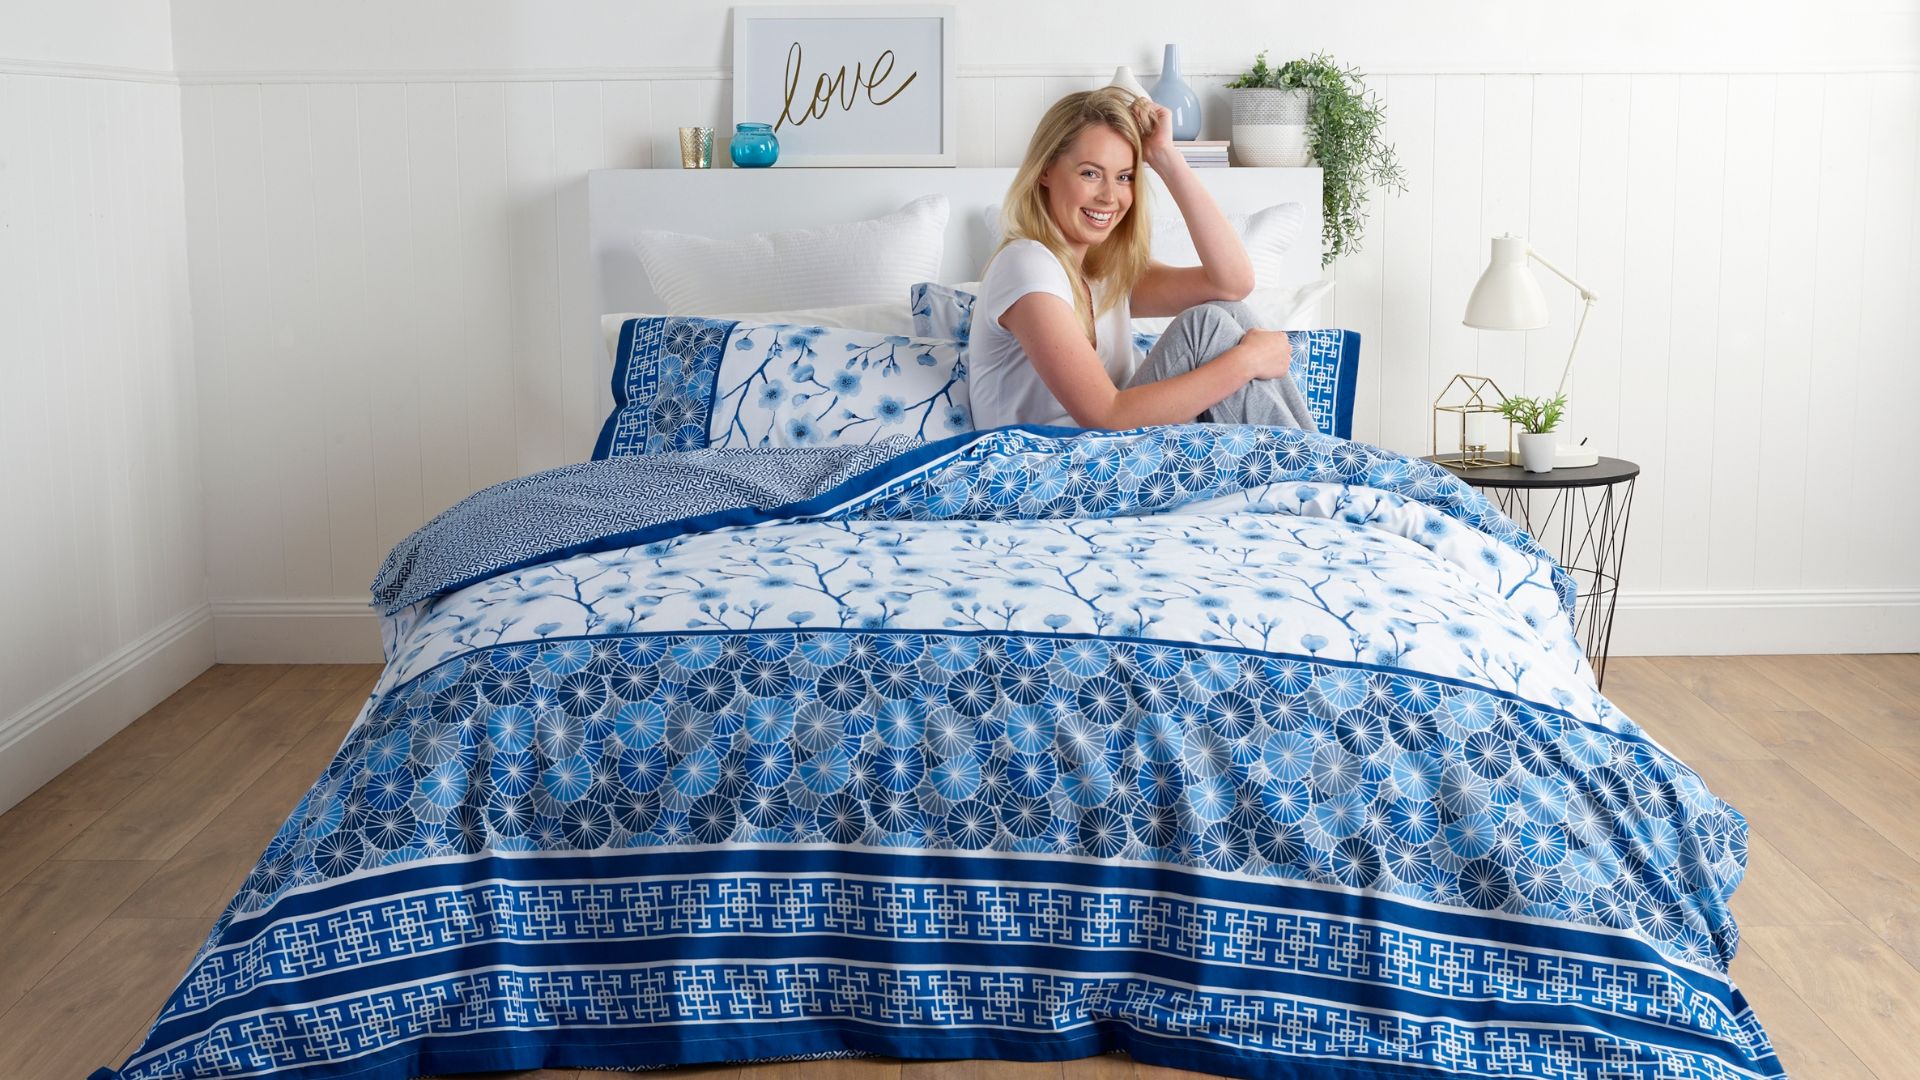 The Best Bedding For Your Style Of Sleeping